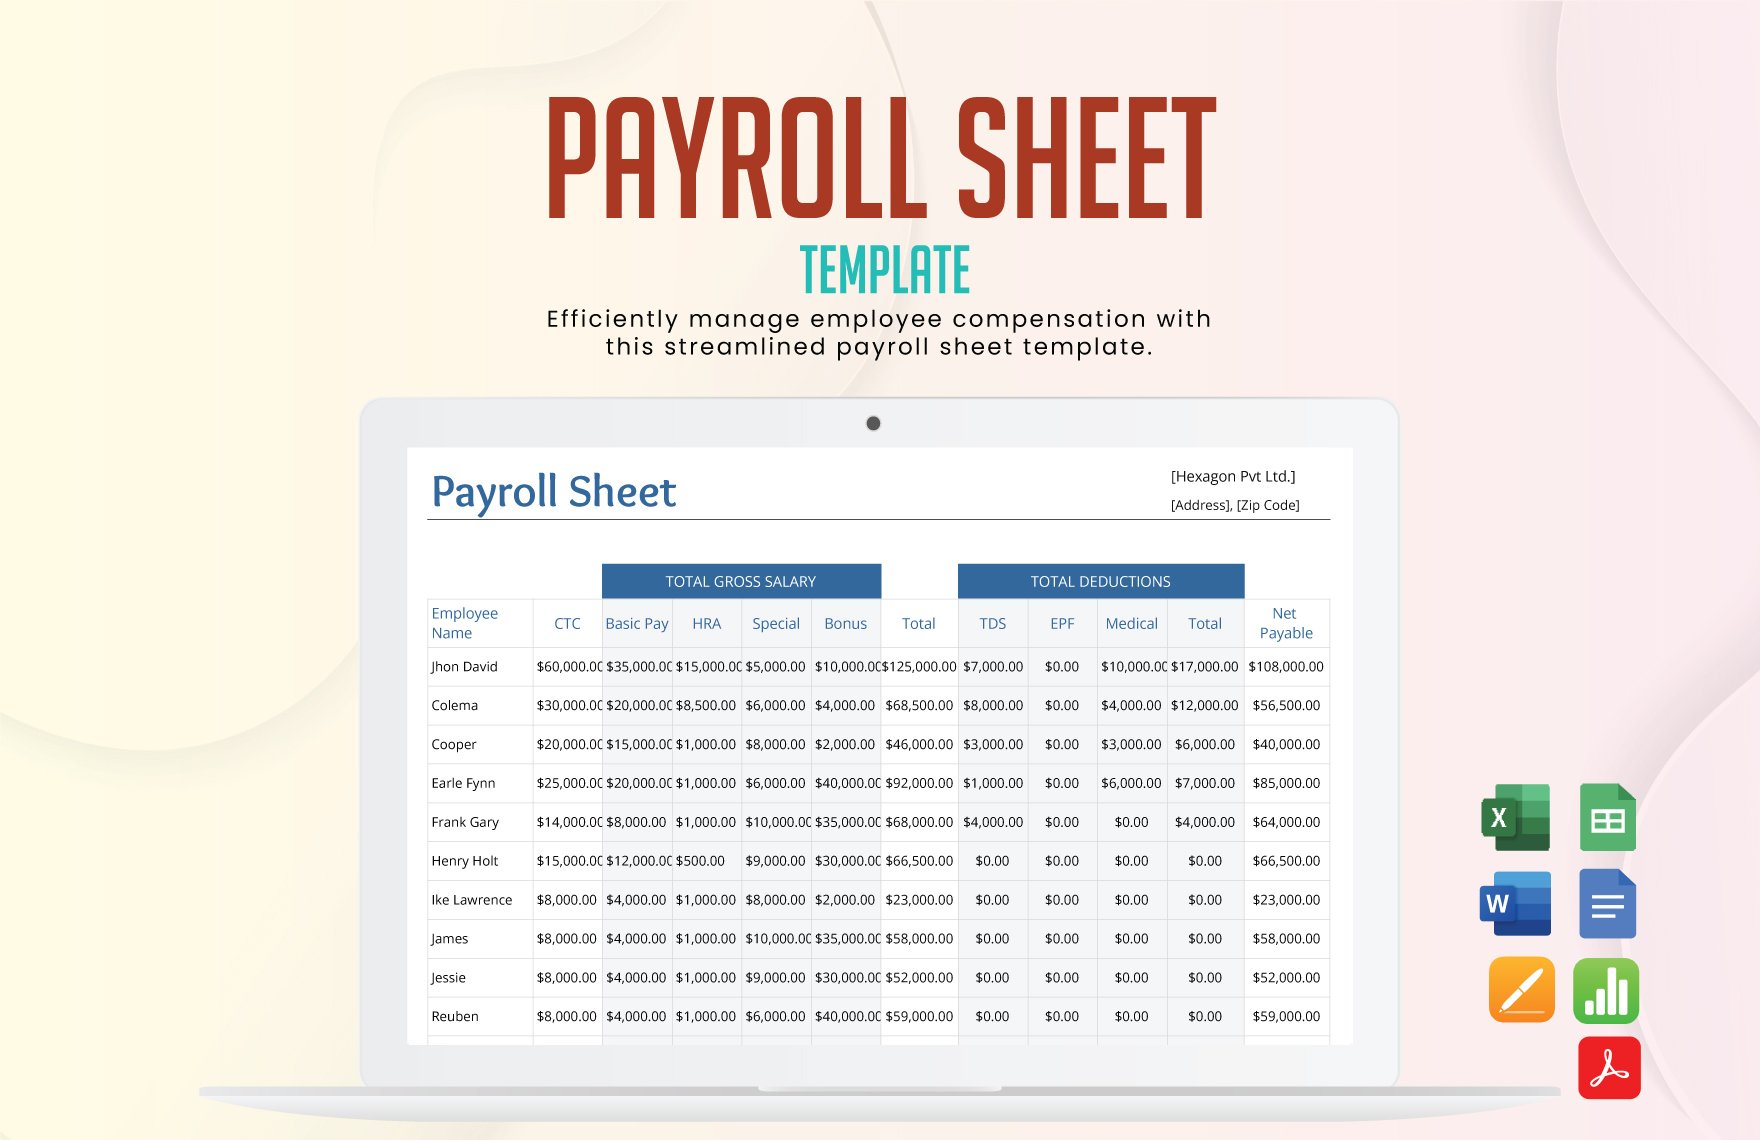 Free Payroll Sheet Template in Word, Google Docs, Excel, PDF, Google Sheets, Apple Pages, Apple Numbers